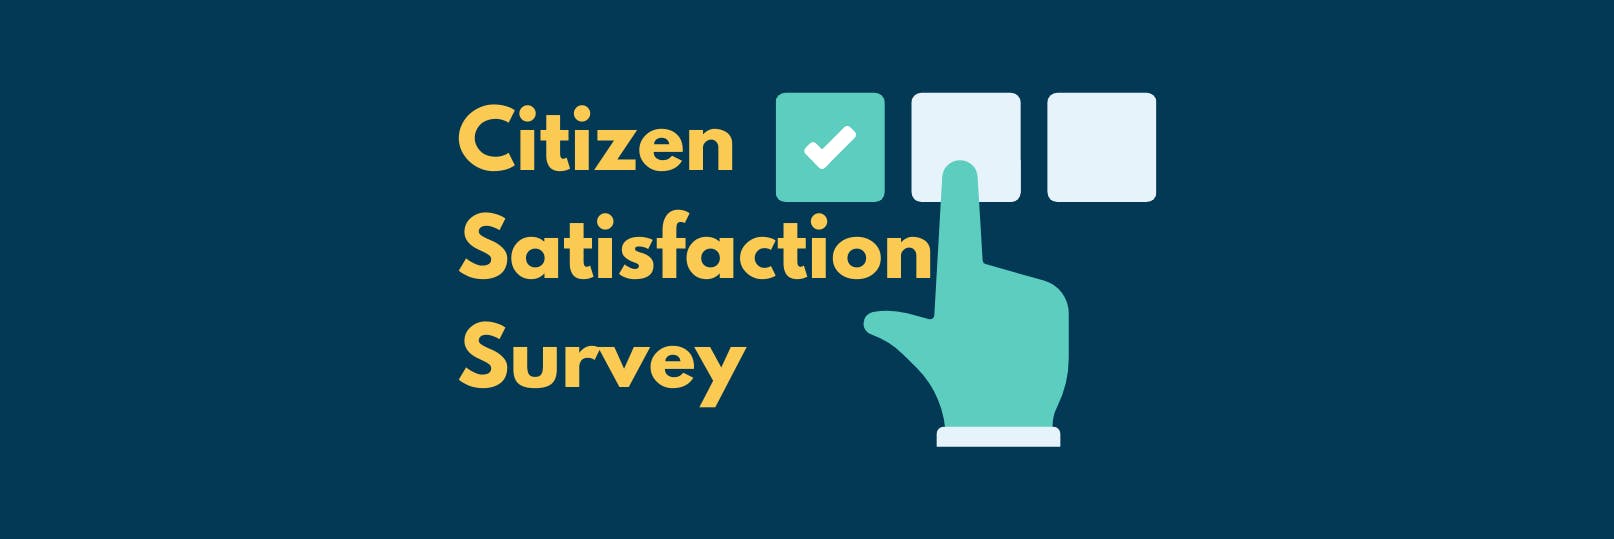 Citizen Satisfaction Survey banner, featuring a hand tapping selections in a survey